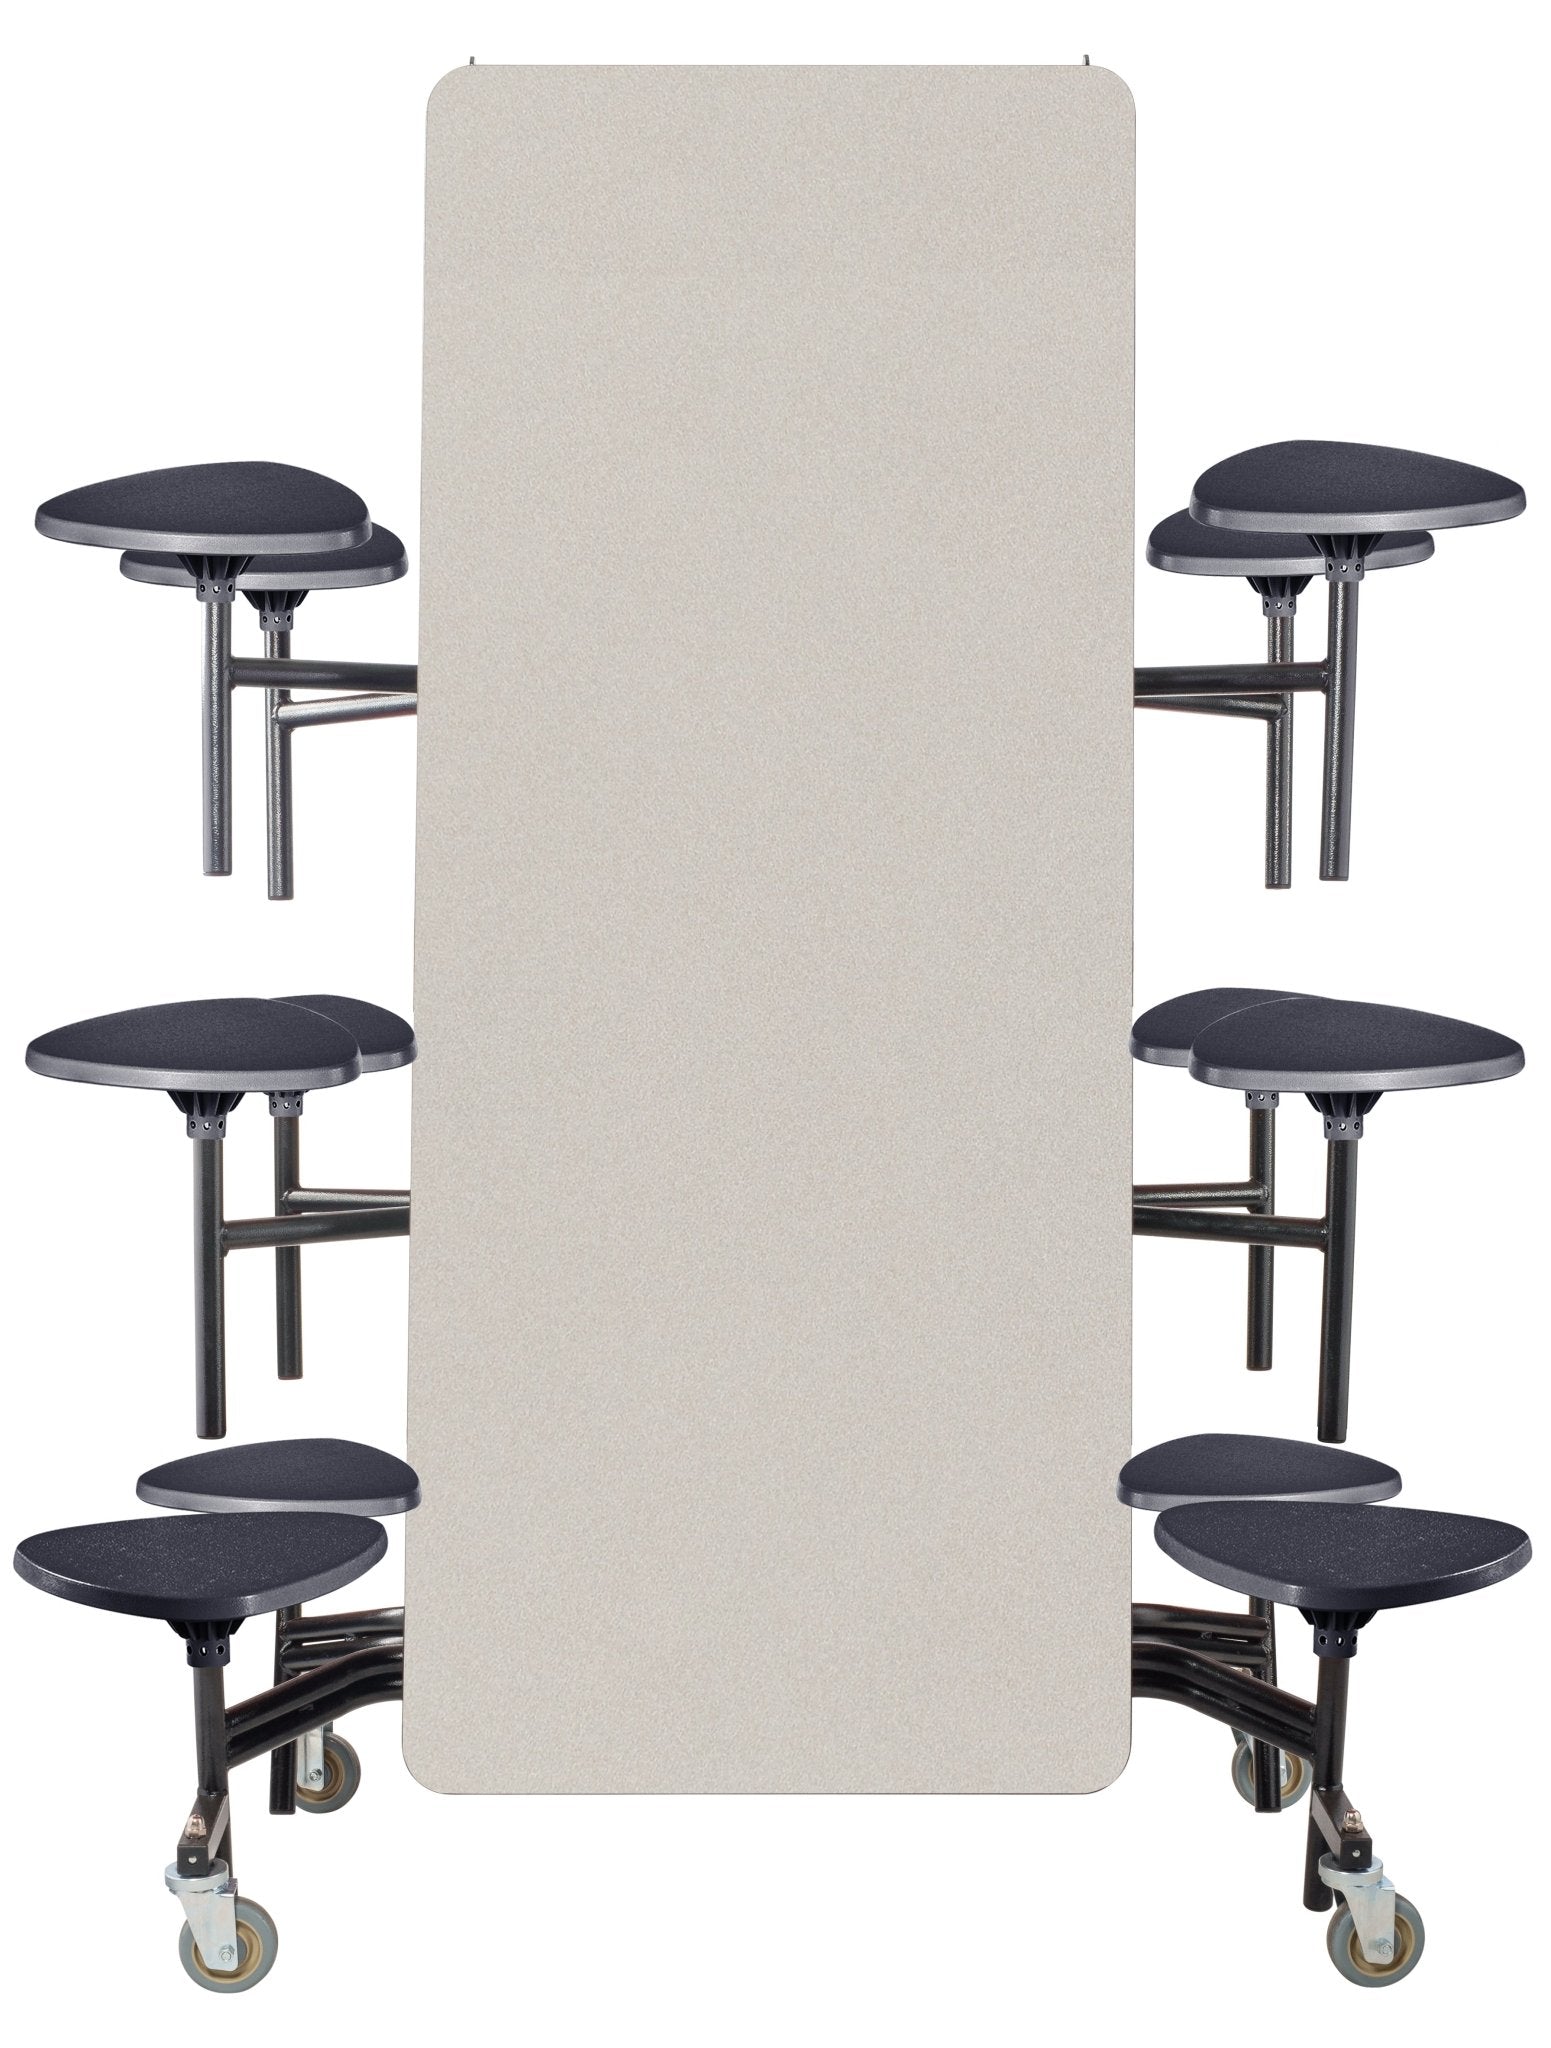 Mobile Cafeteria Lunchroom Stool Table - 30" W x 12' L - 12 Stools - MDF Core - Protect Edge - Chrome Frame - SchoolOutlet